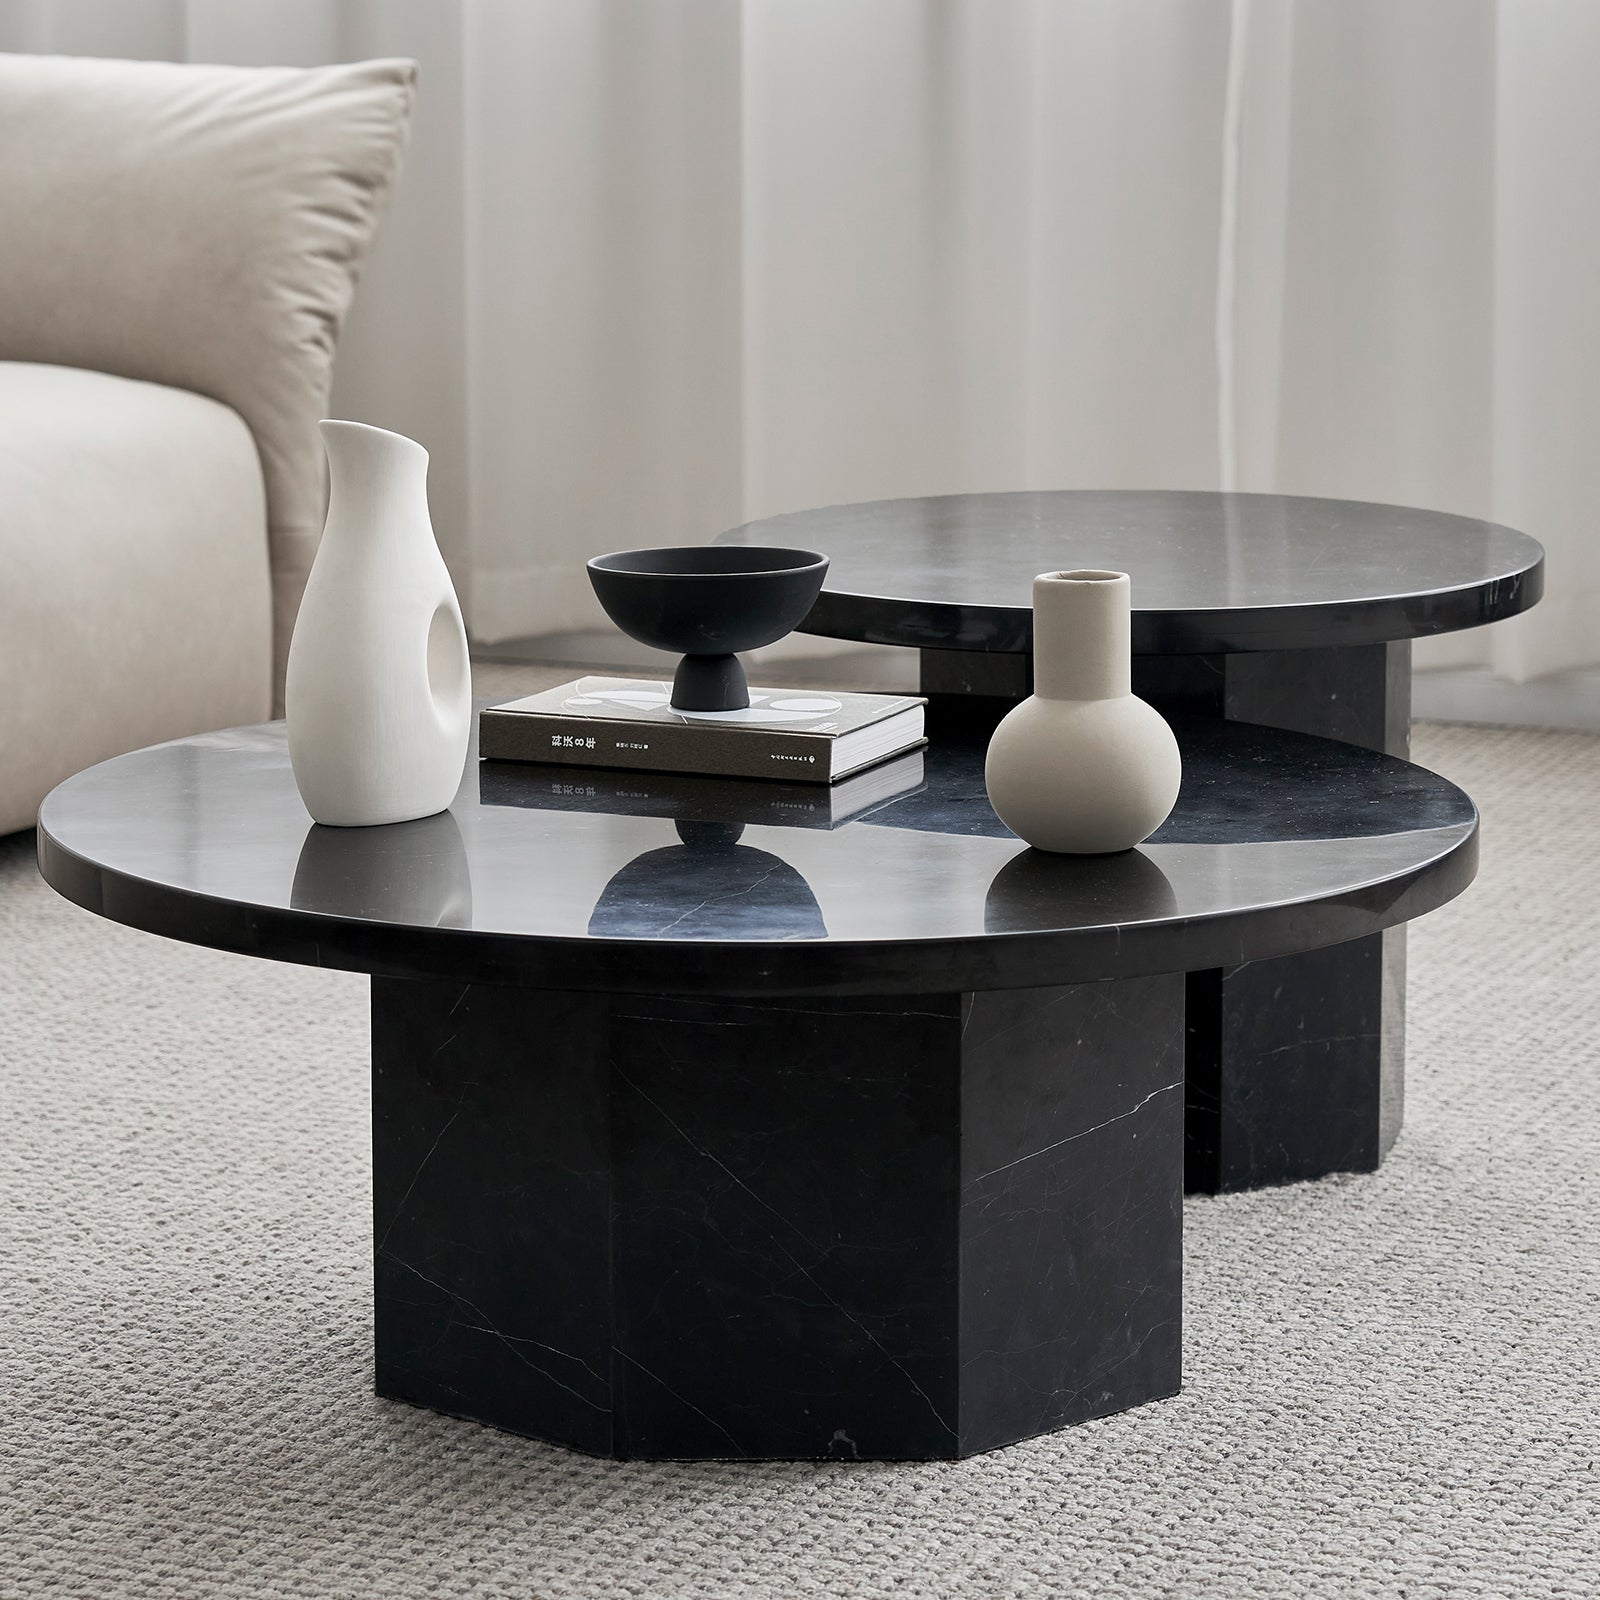 Sugar Cubes Coffee Table / Round - Black-And-White Marble - φ800mm